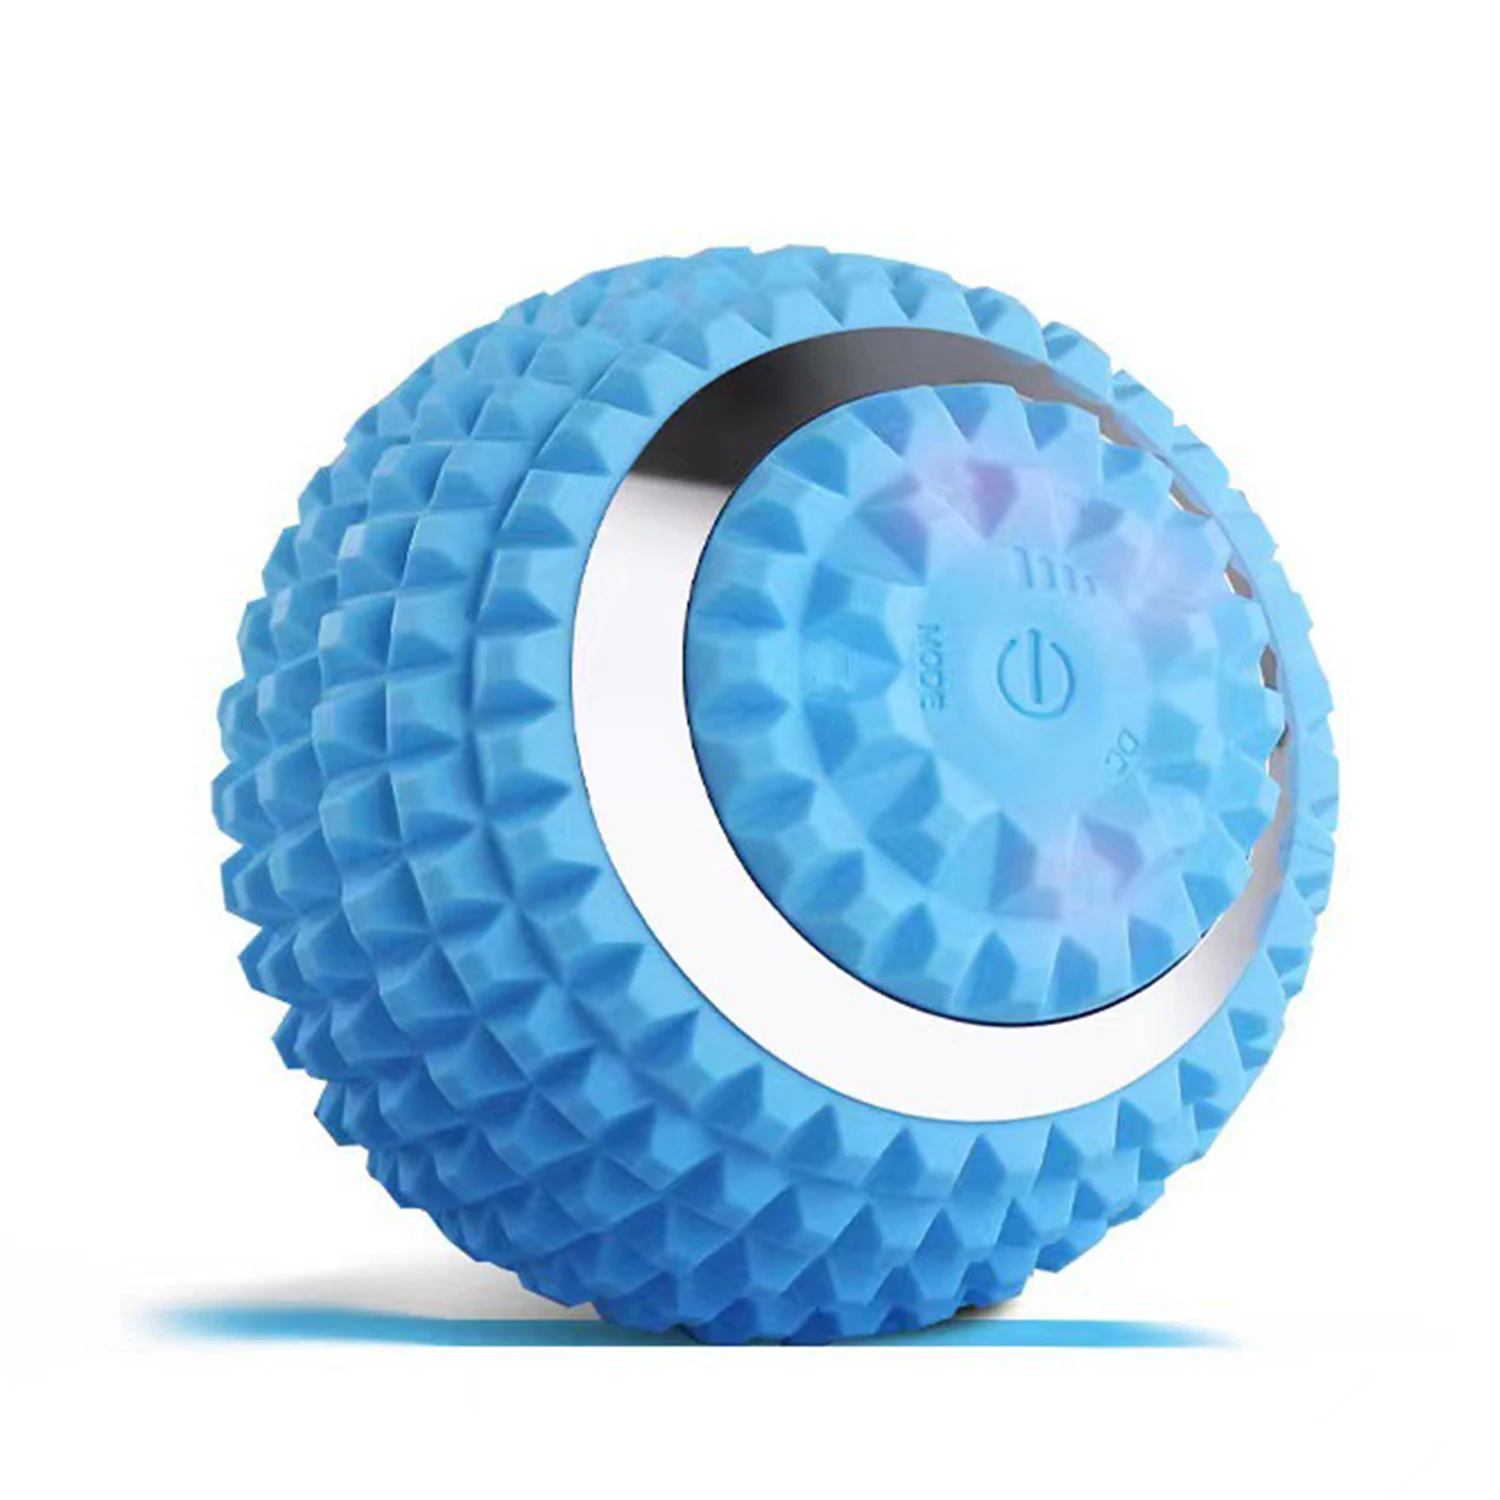 

Massage Ball,Electric 4 Speeds High Intensity Vibrating,Myofascial Release for Muscle,Yoga,Fitness,Plantar Fasciitis,Pain Relief